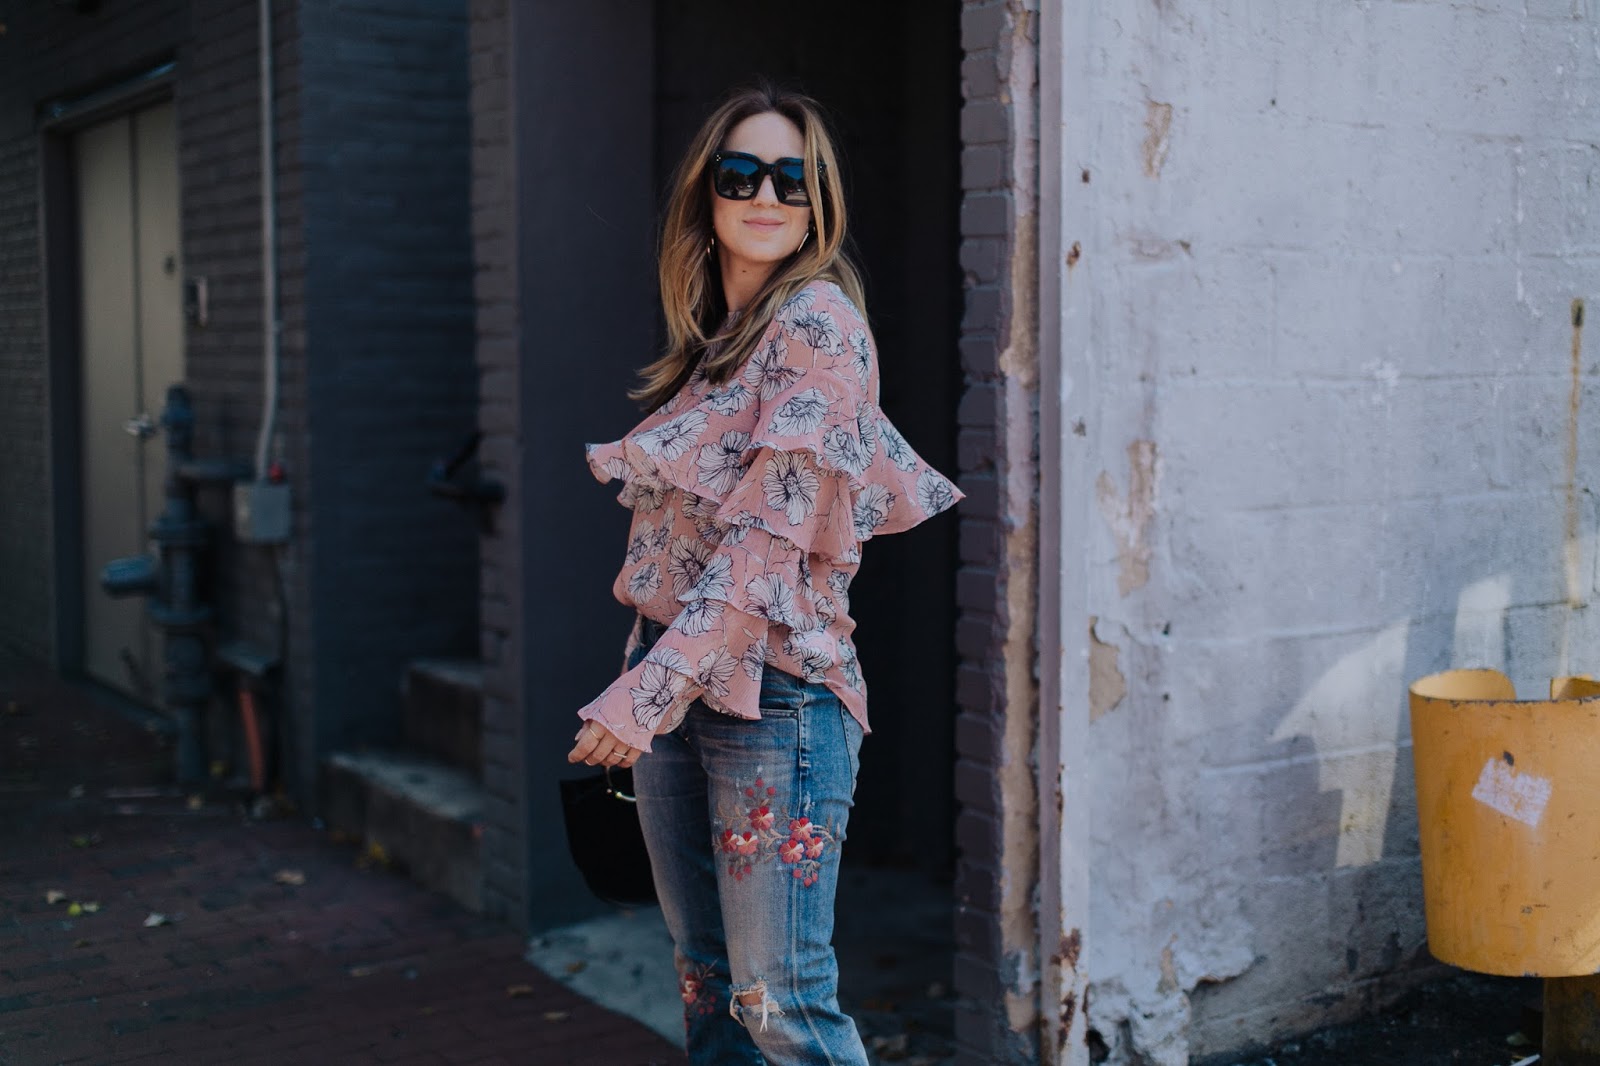 decorated denim, denim styles, denim trends, embroidered denim, patchwork denim, south moon under, denim, blogger, style, outfit, inspiration, citizens of humanity, a gold e, jeans, floral, future glory bag